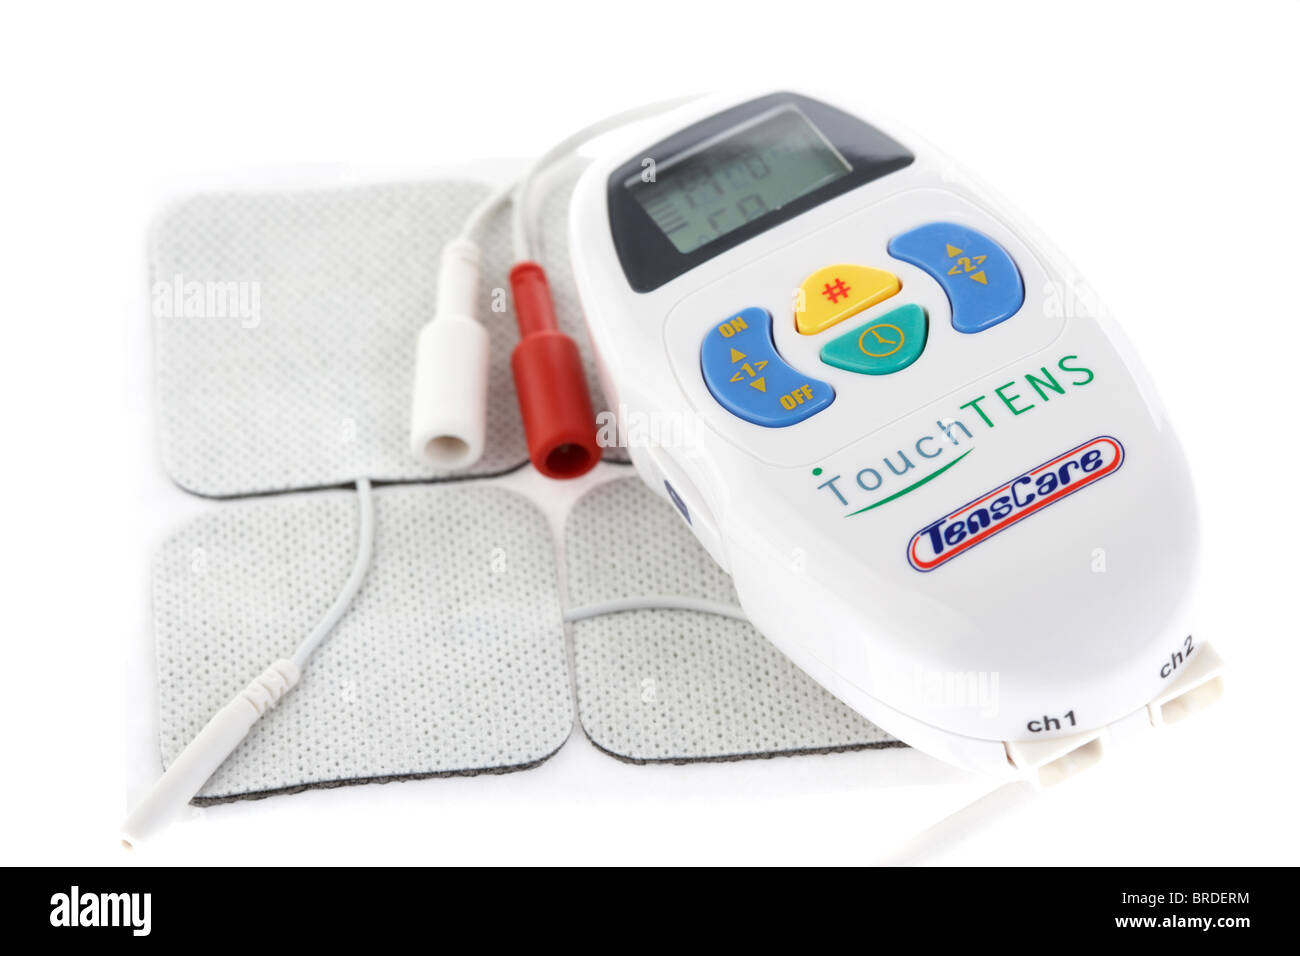 dual channel tens machine for pain relief Stock Photo